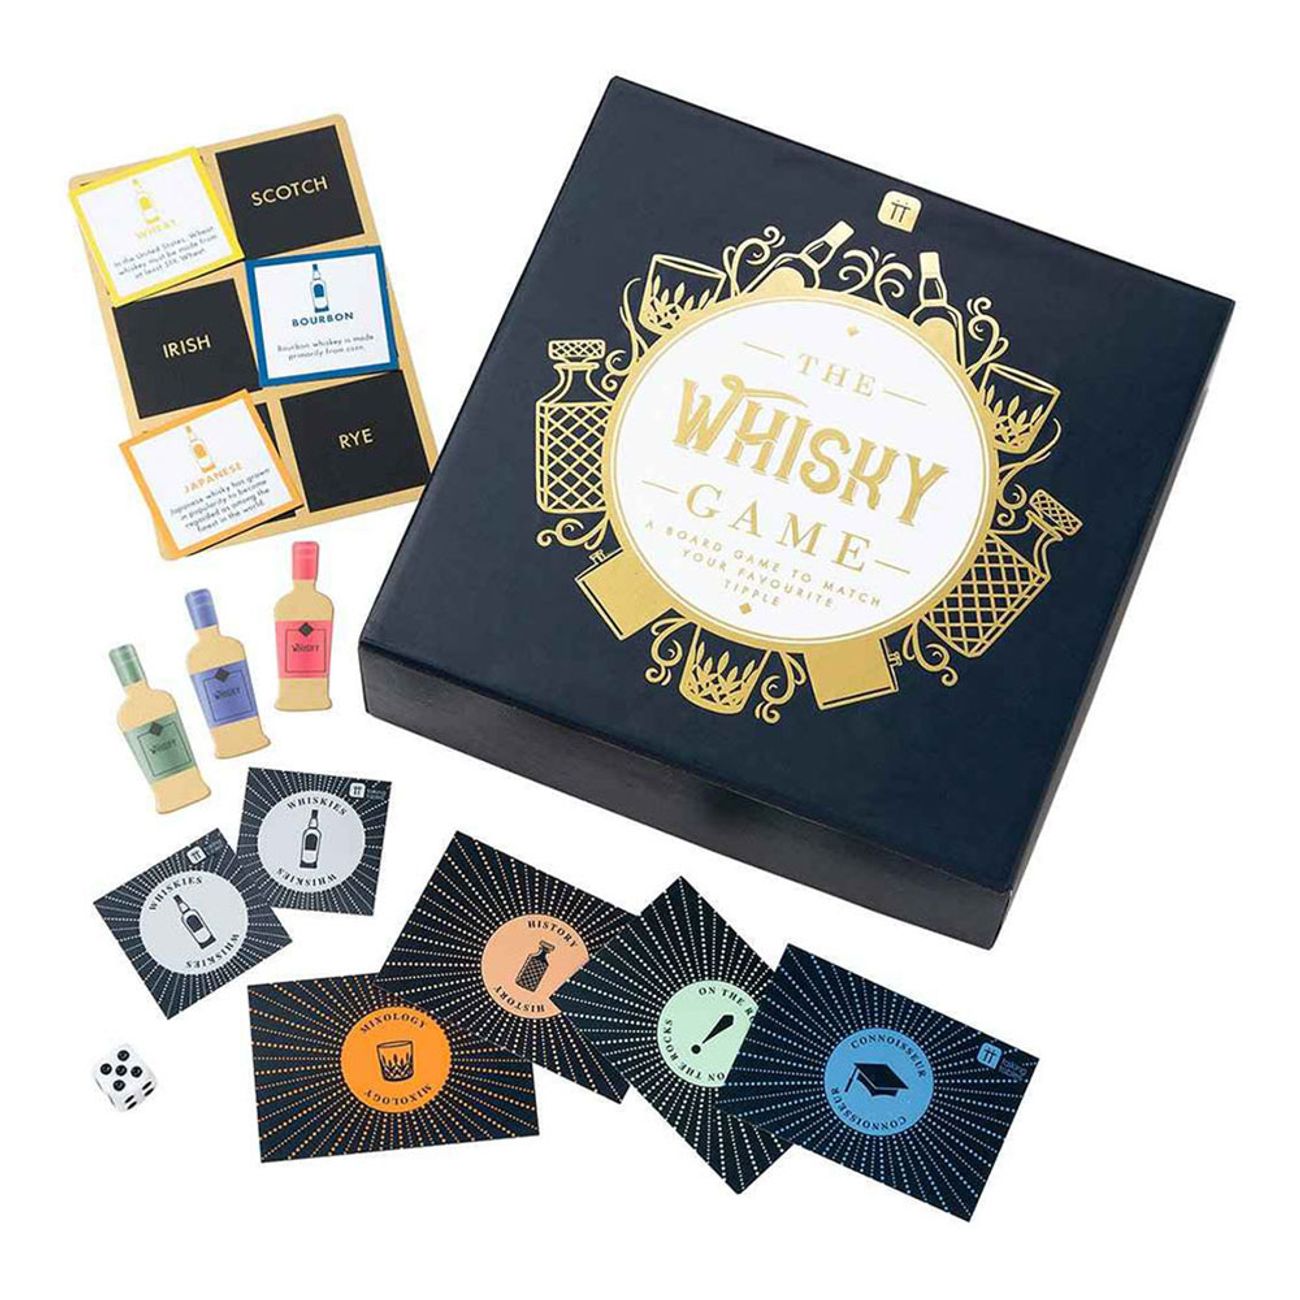 the-whiskey-game-76247-2